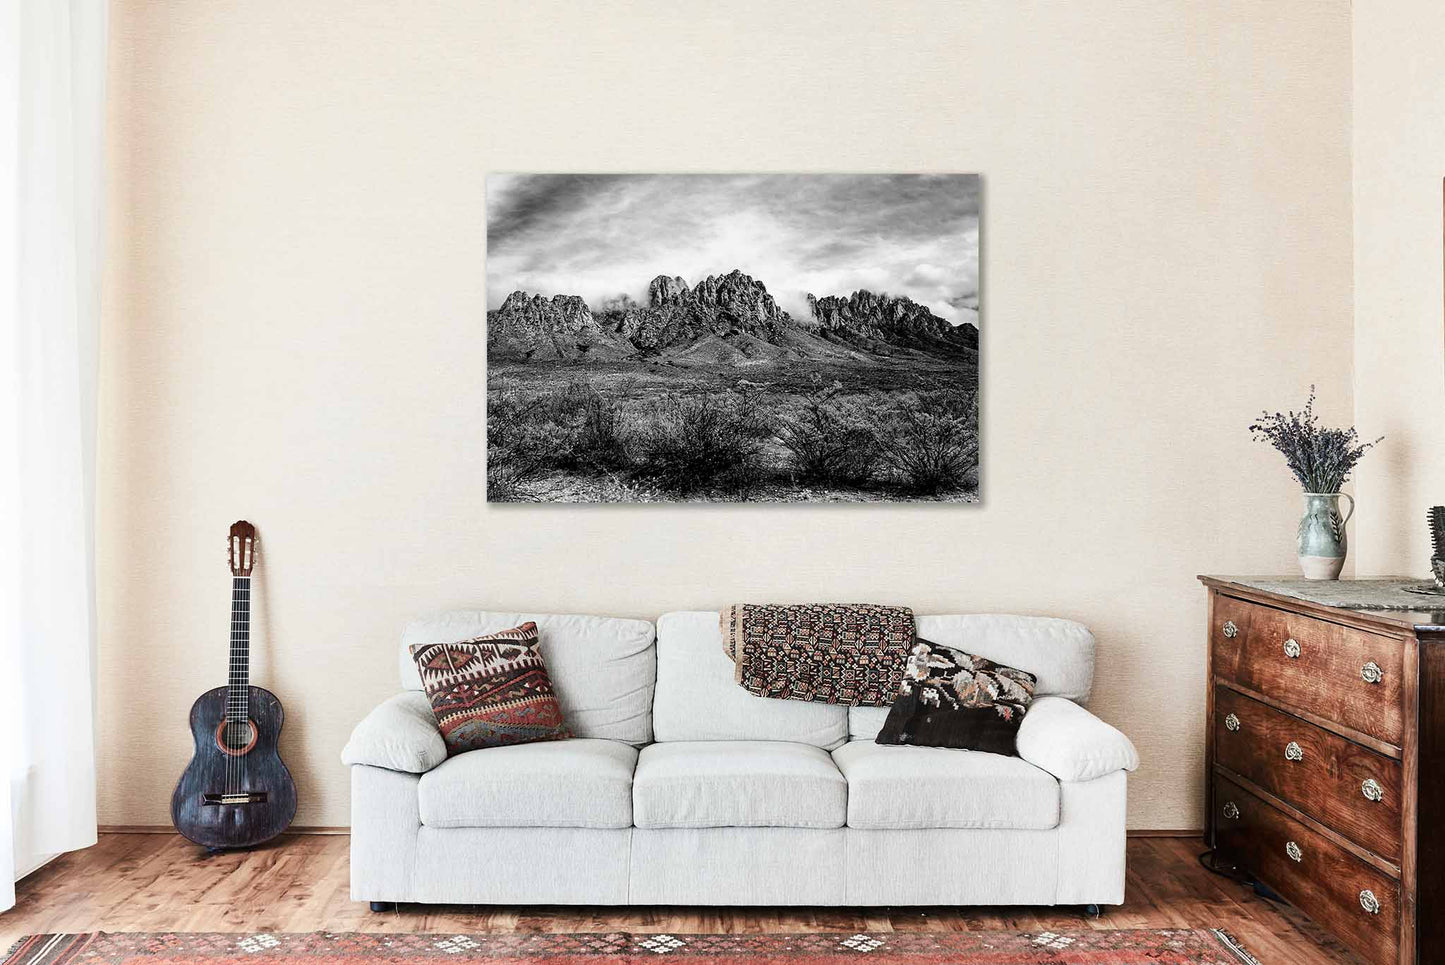 Landscape Metal Print (Ready to Hang) Black and White Photo on Aluminum of Organ Mountains near Las Cruces New Mexico Chihuahuan Desert Wall Art Southwest Decor